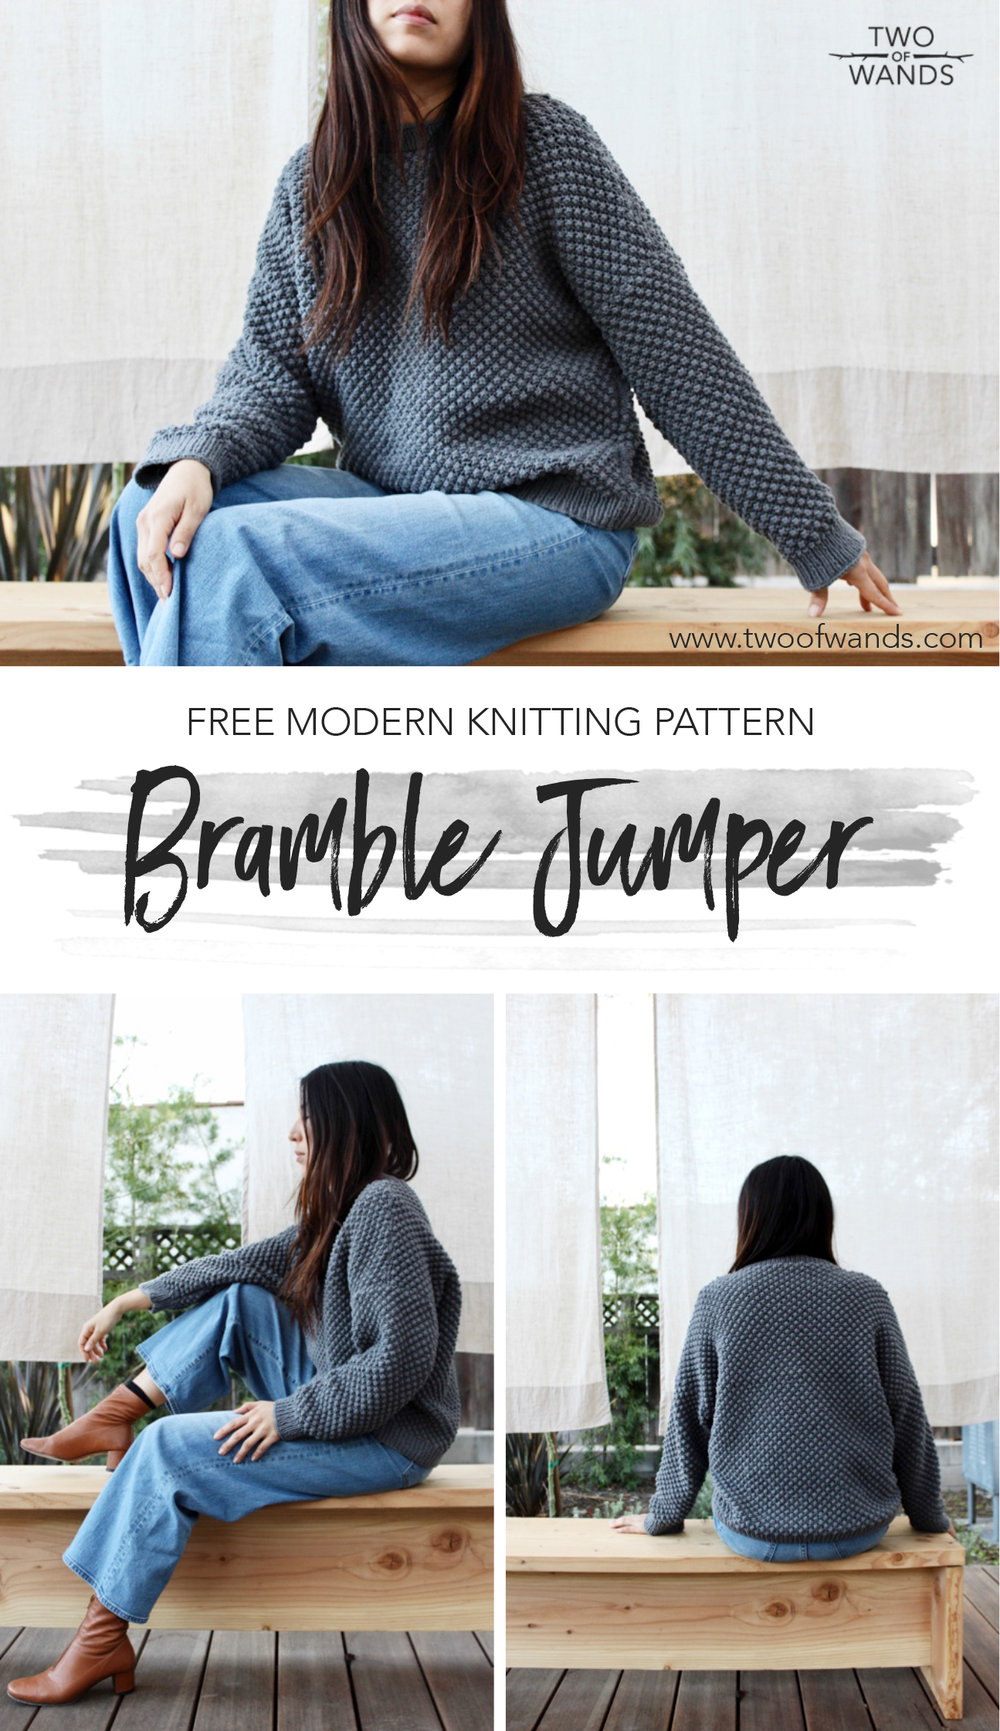 Bramble Jumper pattern by Two of Wands